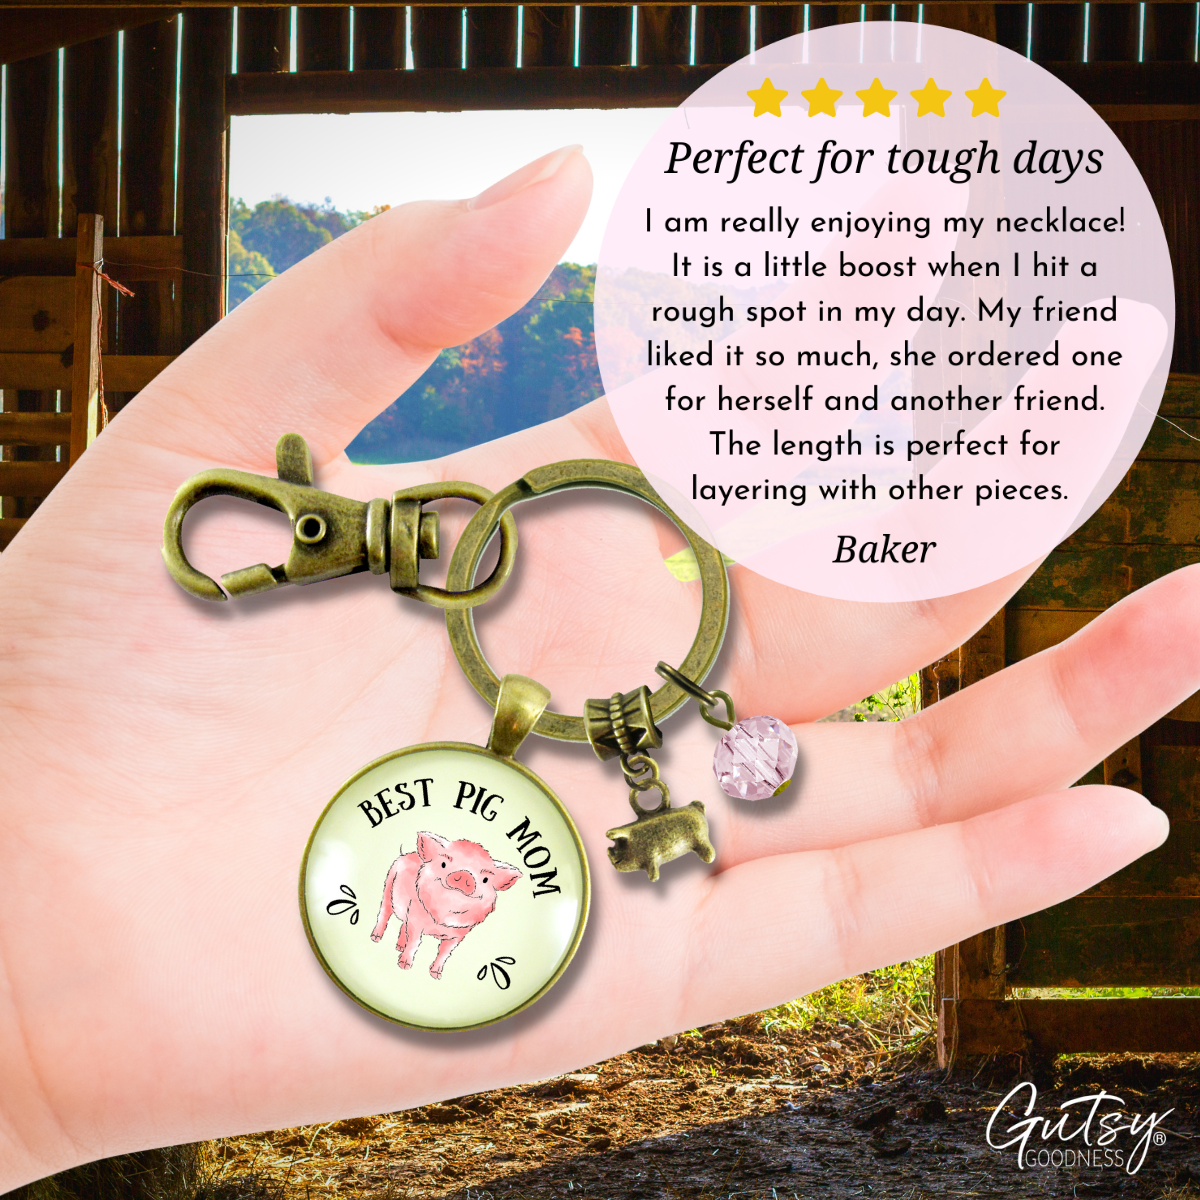 Pig Mom Keychain Country Inspired Womens Pig Lover Gift Jewelry - Gutsy Goodness Handmade Jewelry;Pig Mom Keychain Country Inspired Womens Pig Lover Gift Jewelry - Gutsy Goodness Handmade Jewelry Gifts